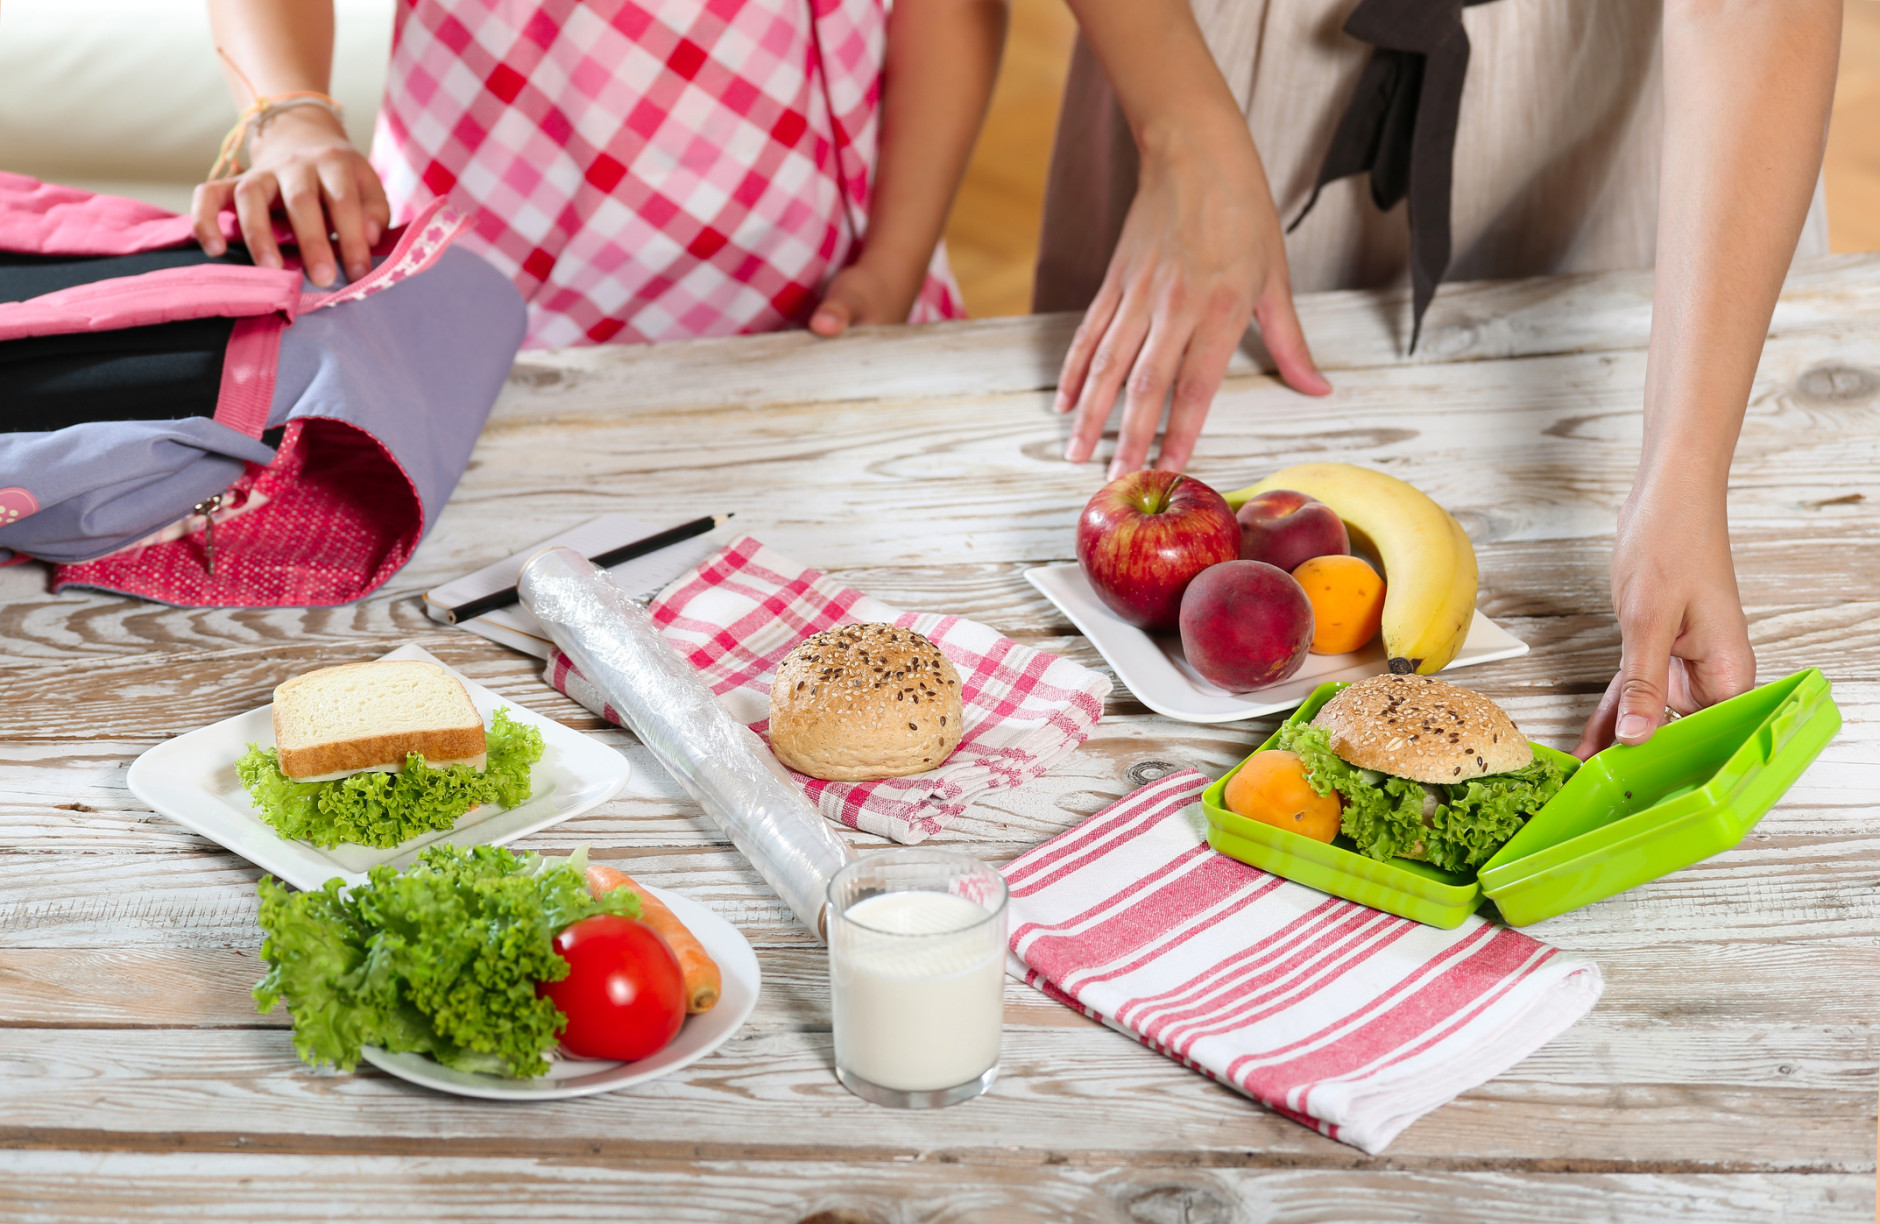 The key to preparing healthy school lunches is to give your kids options. (Thinkstock)